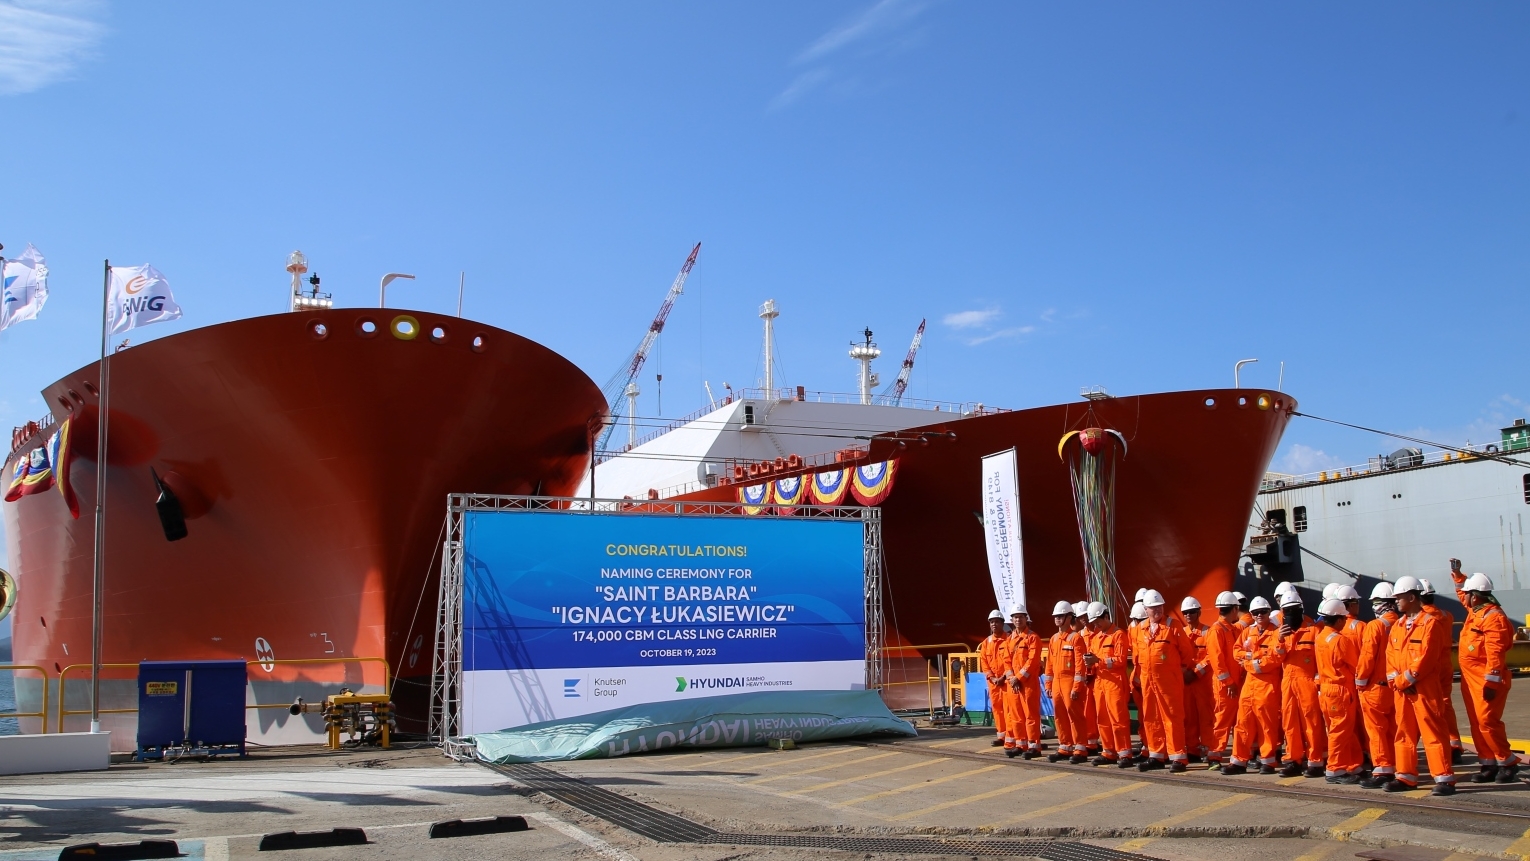 ORLEN to expand its presence in global liquefied natural gas market with two new LNG carriers